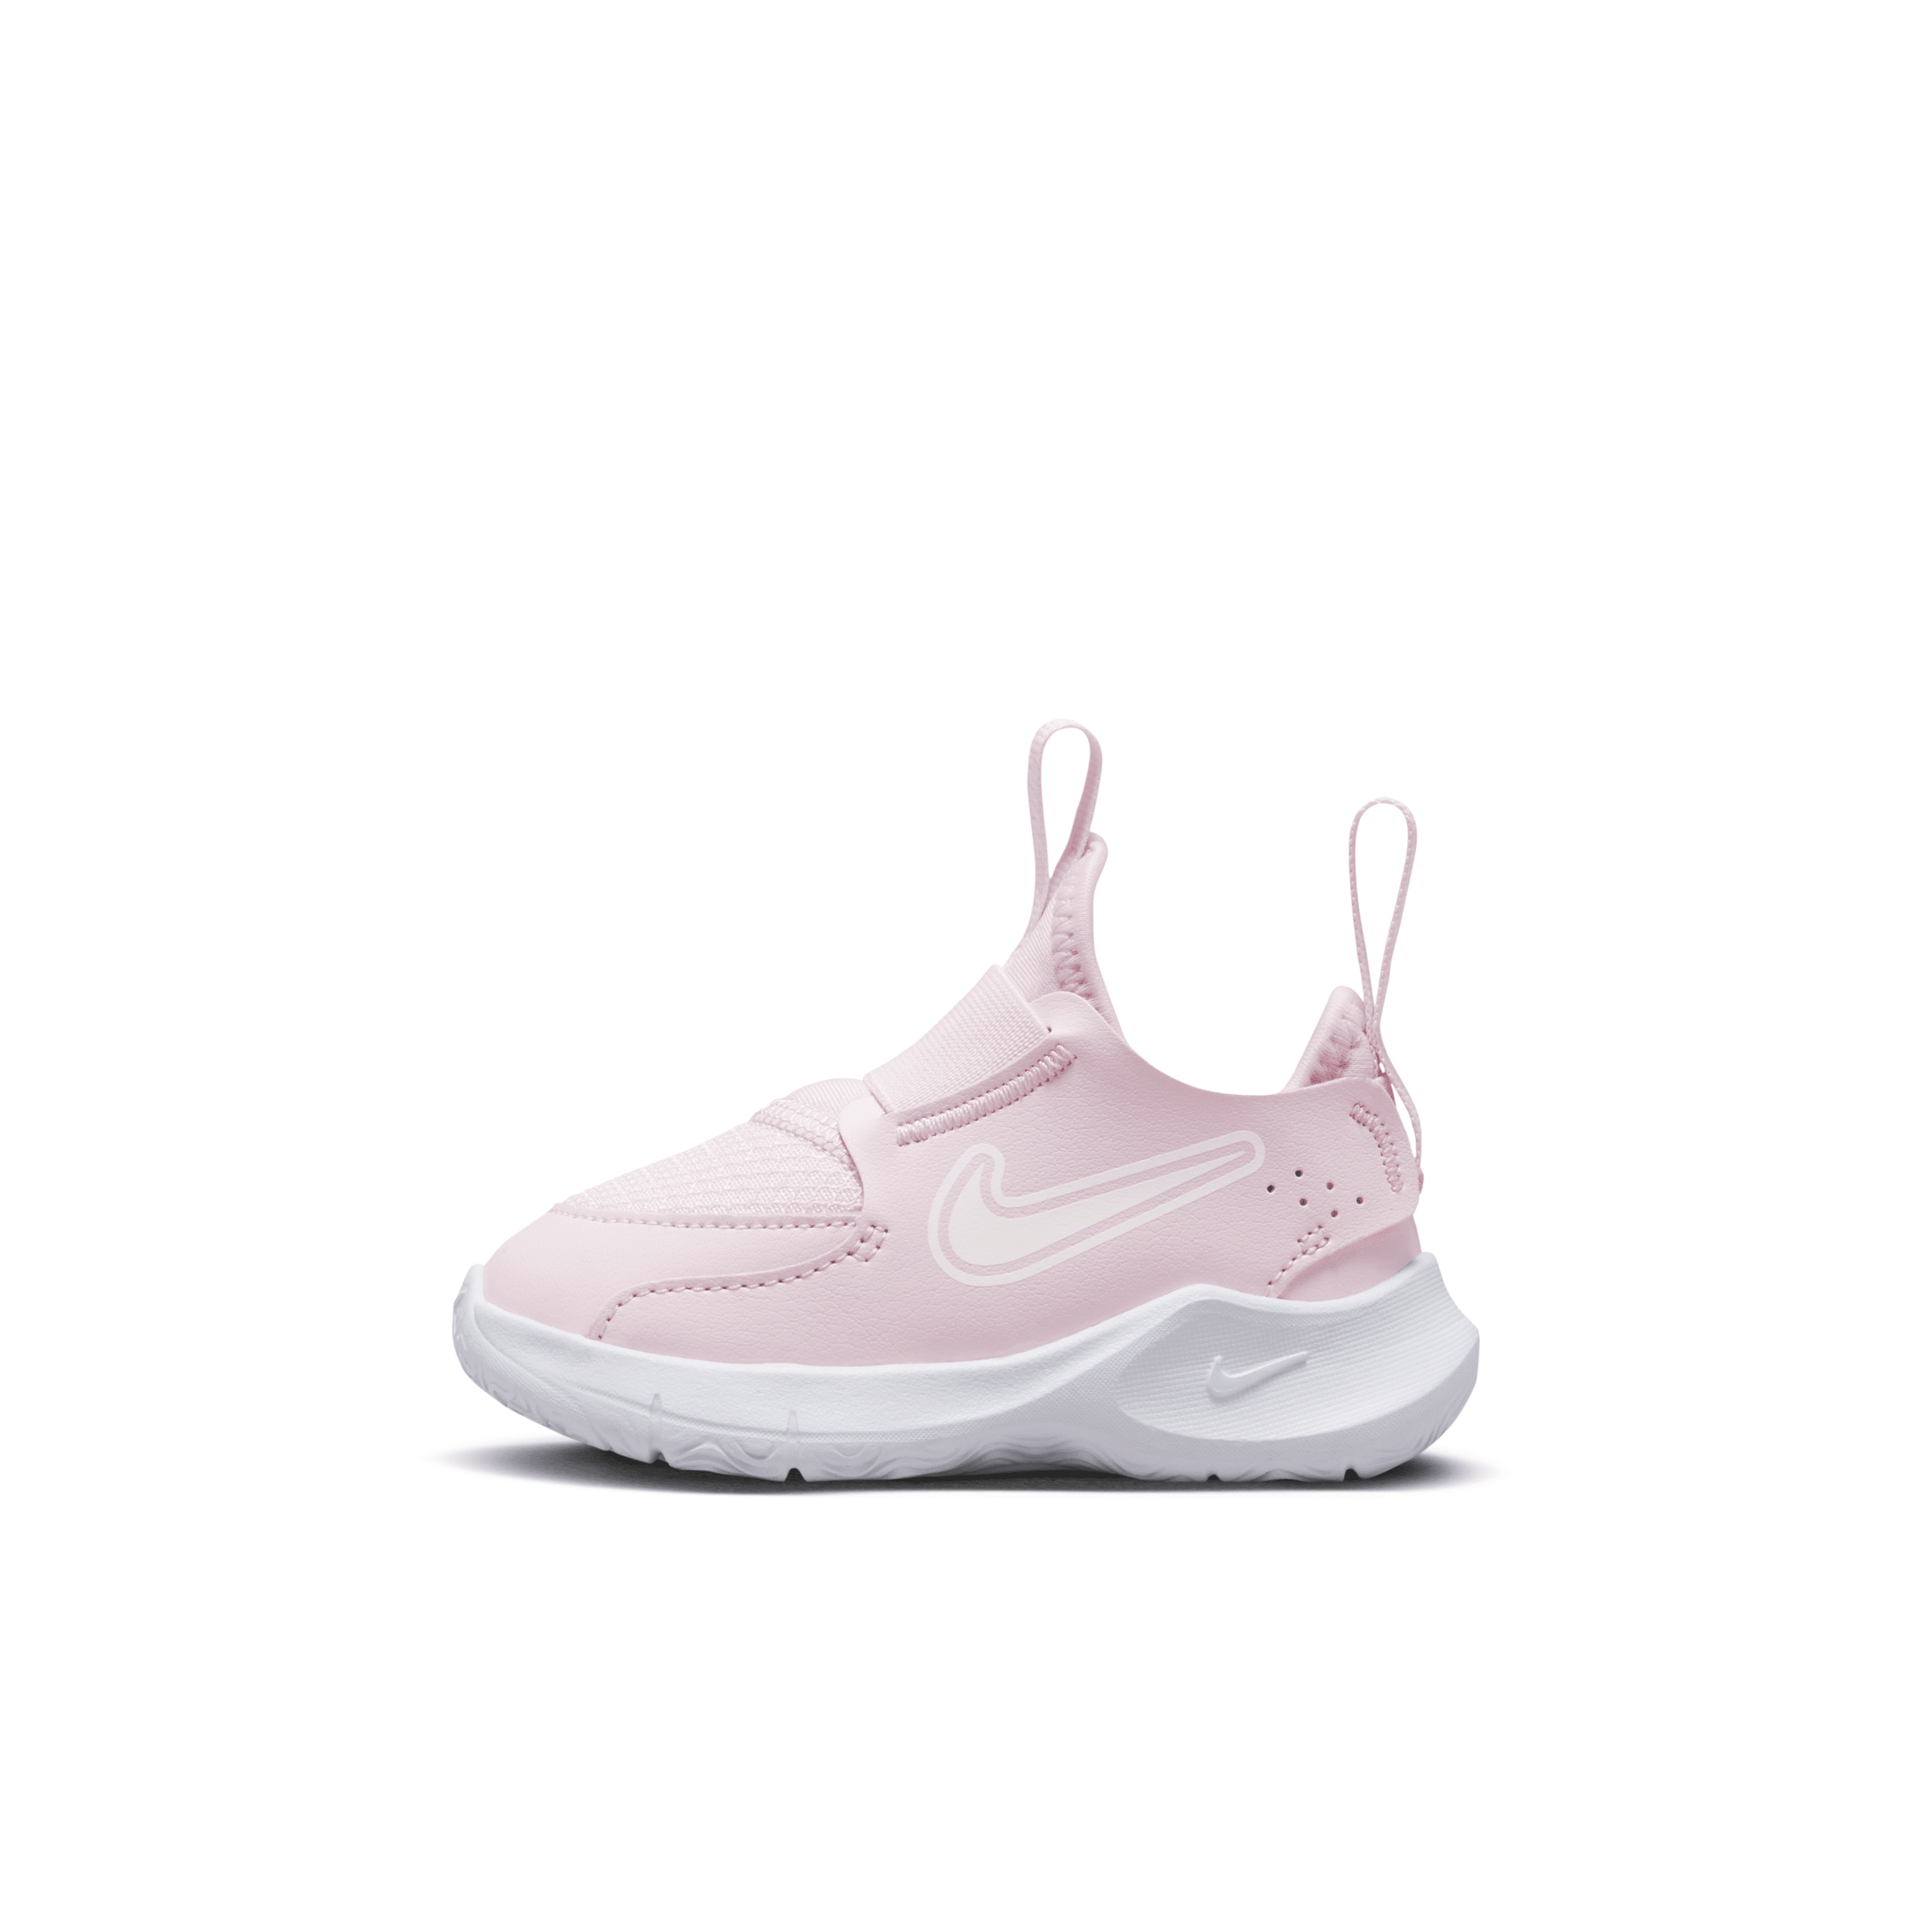 Nike Flex Runner 3 Baby/toddler Shoes In Pink